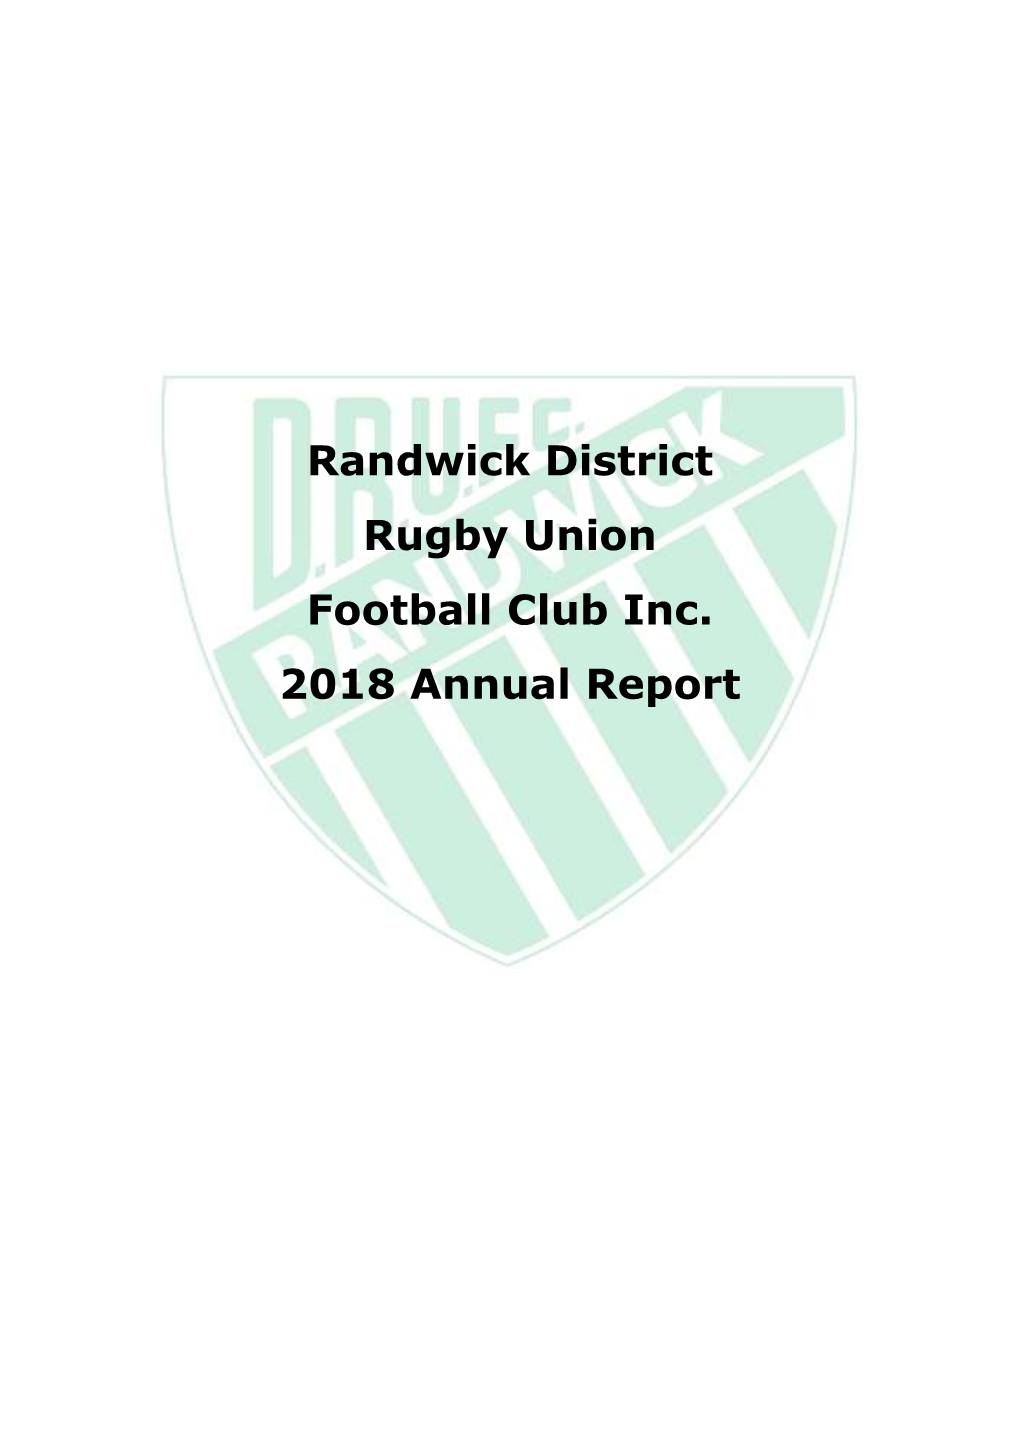 Randwick District Rugby Union Football Club Inc. 2018 Annual Report